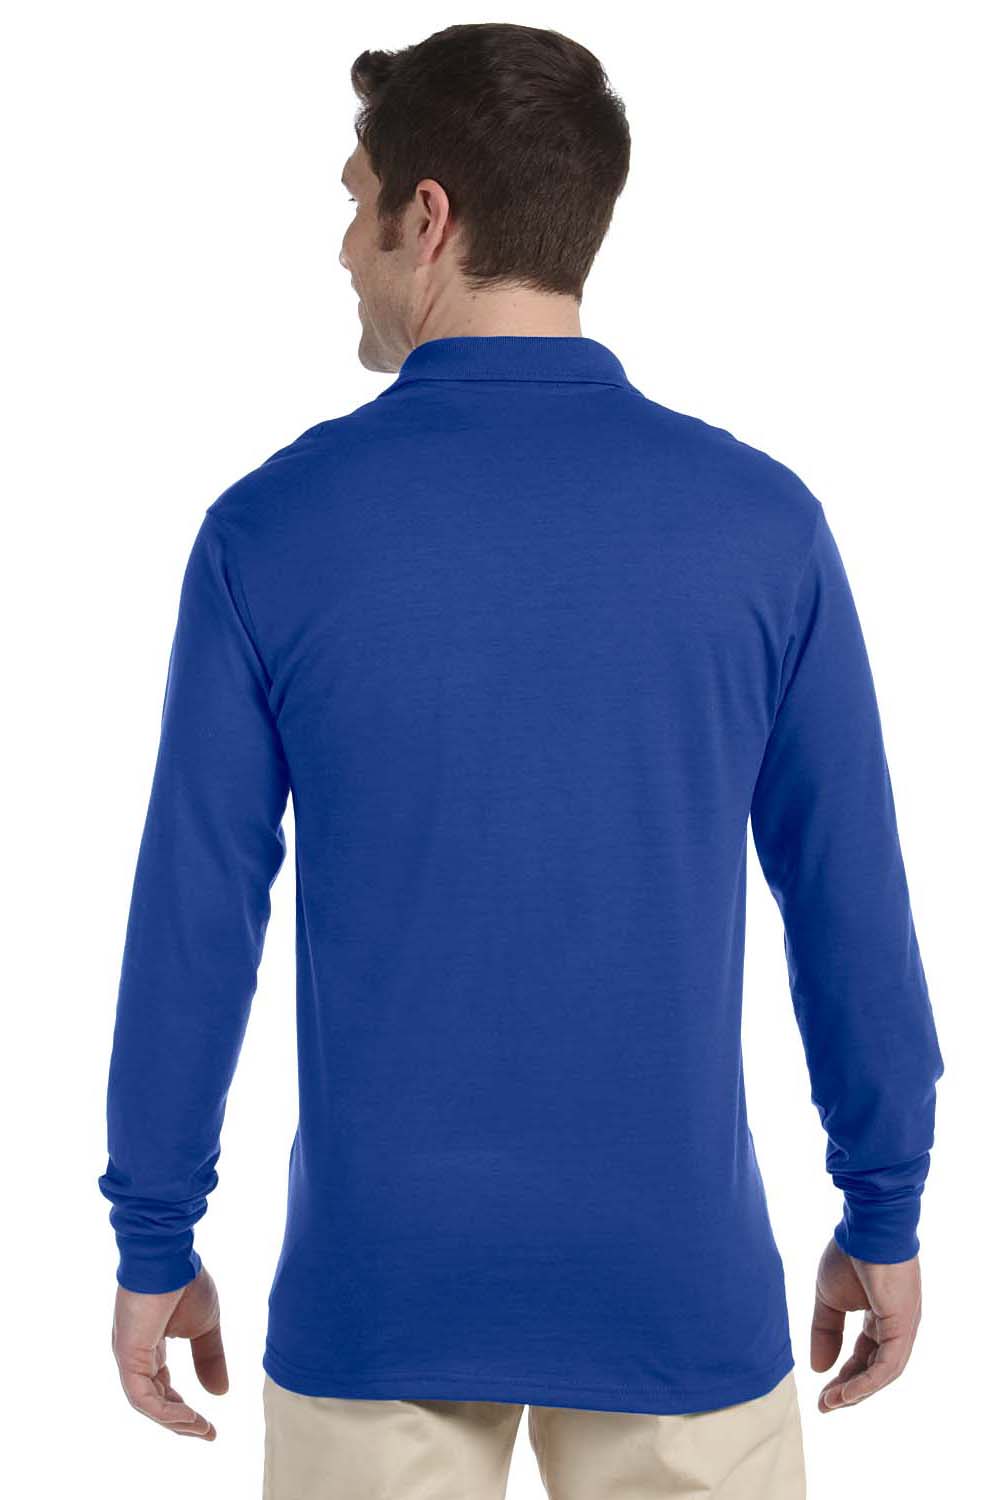 Jerzees 437ML Mens SpotShield Stain Resistant Long Sleeve Polo Shirt Royal Blue Back